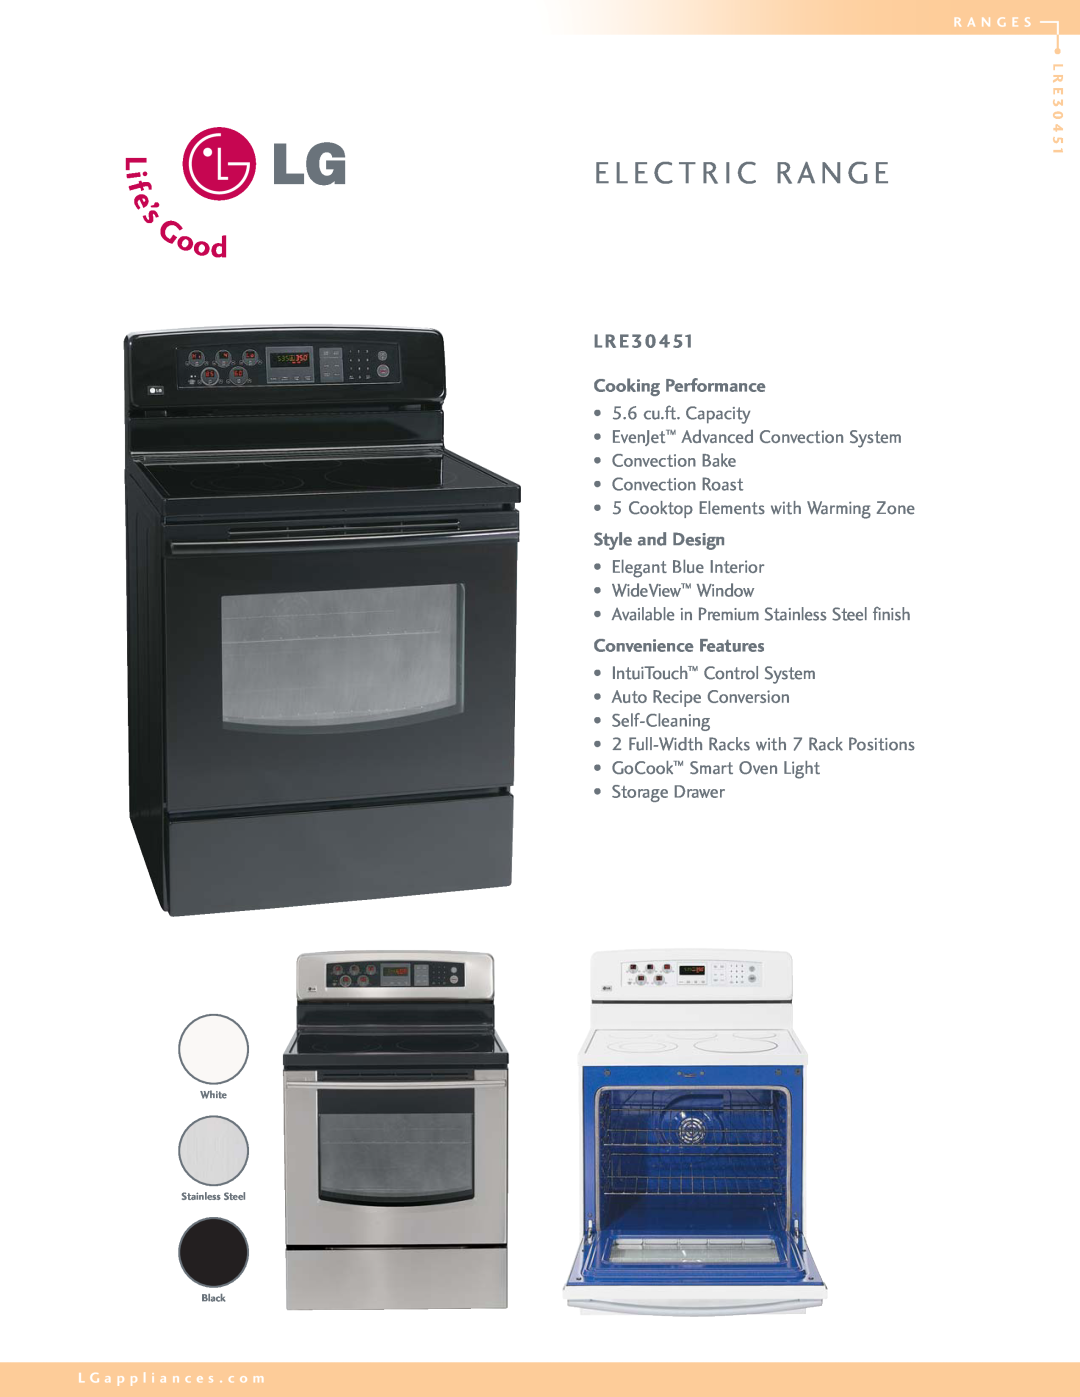 LG Electronics LRE30451 manual E L E C T R I C R A N G E, L R E, Cooking Performance, Style and Design 